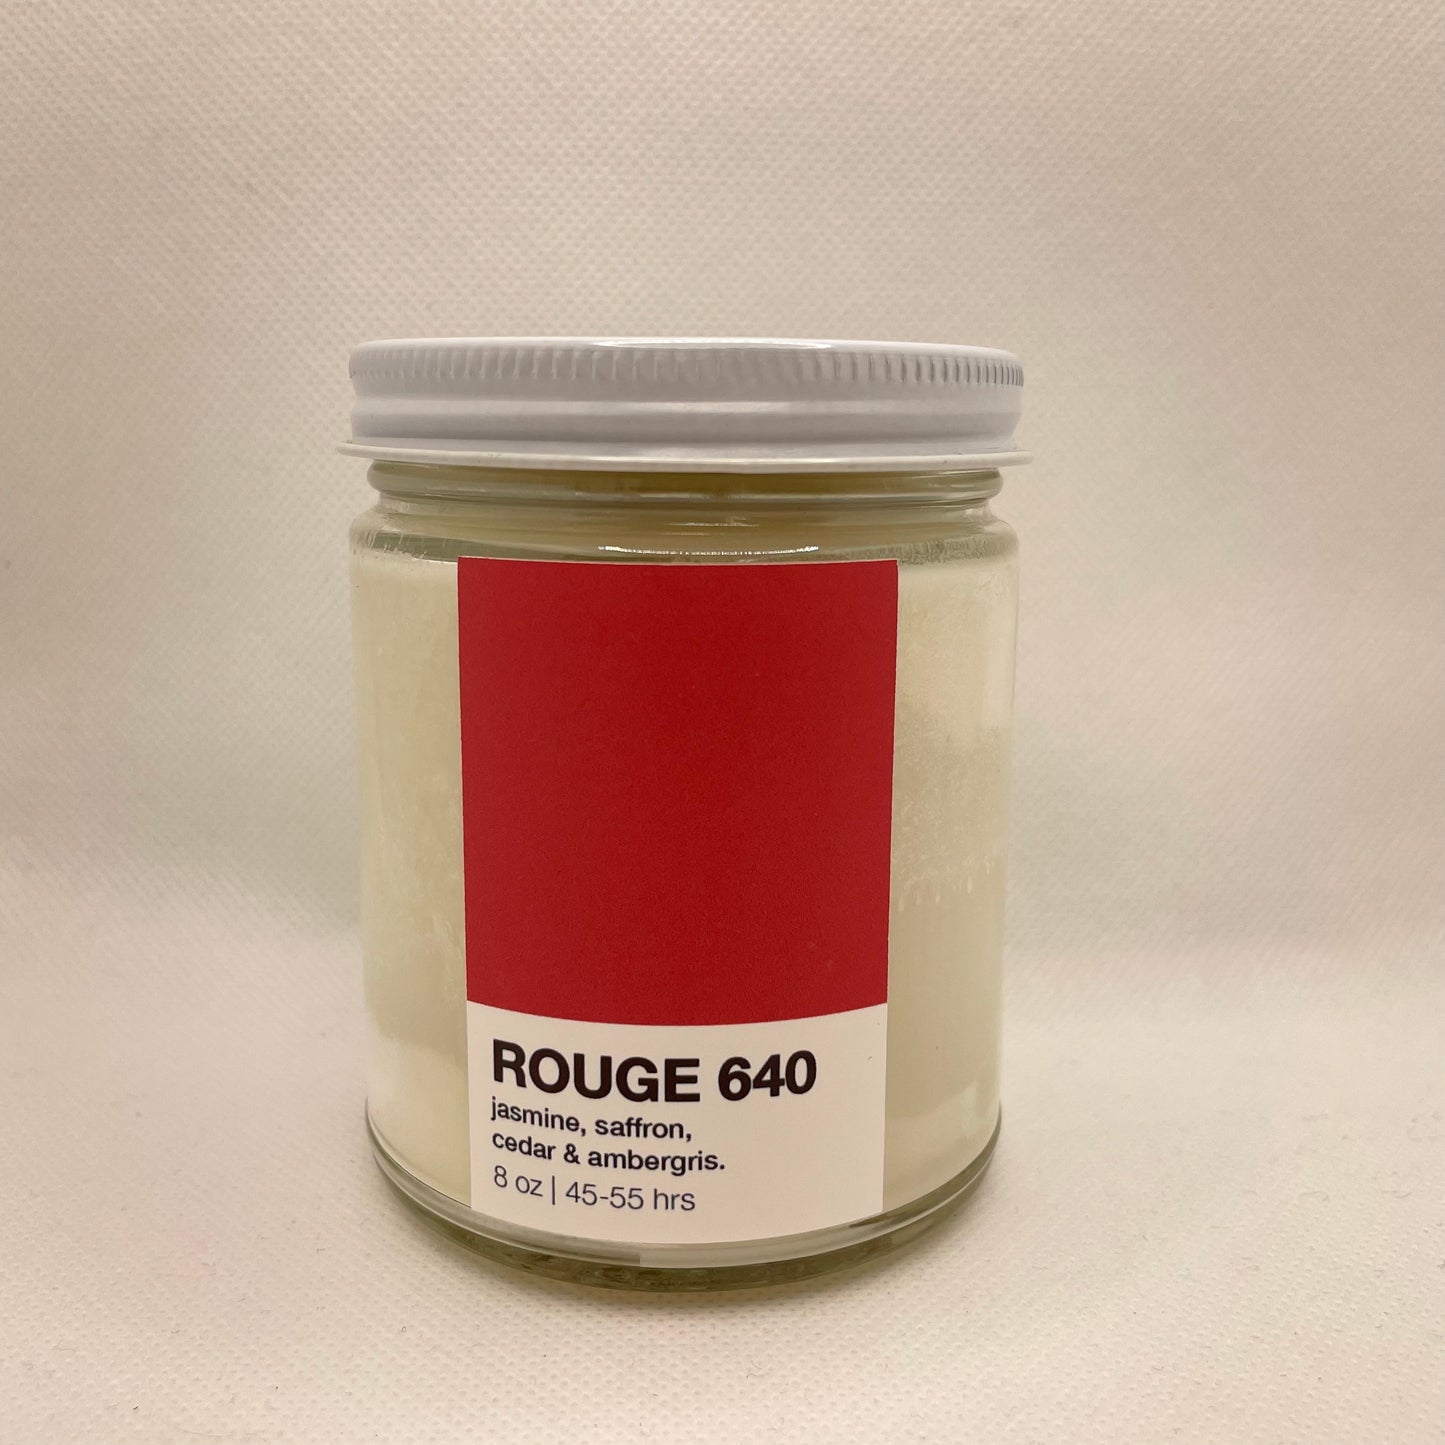 8oz Candle - Rouge 640